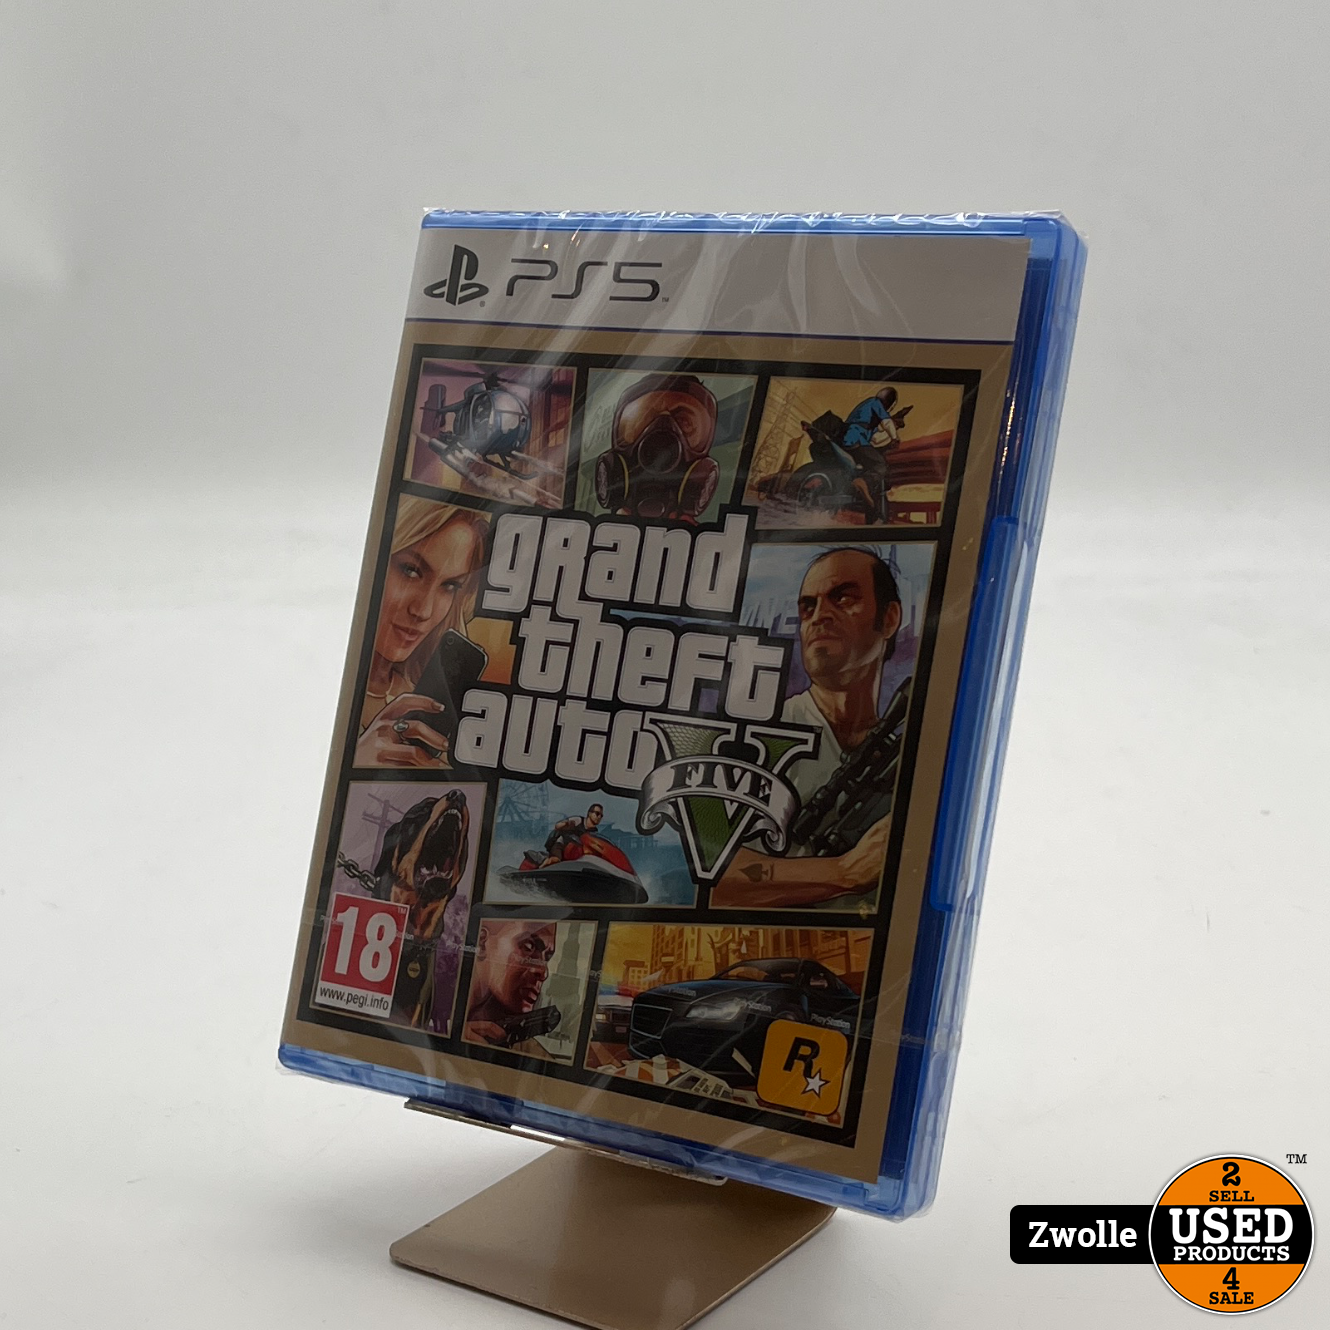 Tactiel gevoel is meer dan Janice Playstation 5 game Grand theft Auto 5 GTA V - Used Products Zwolle